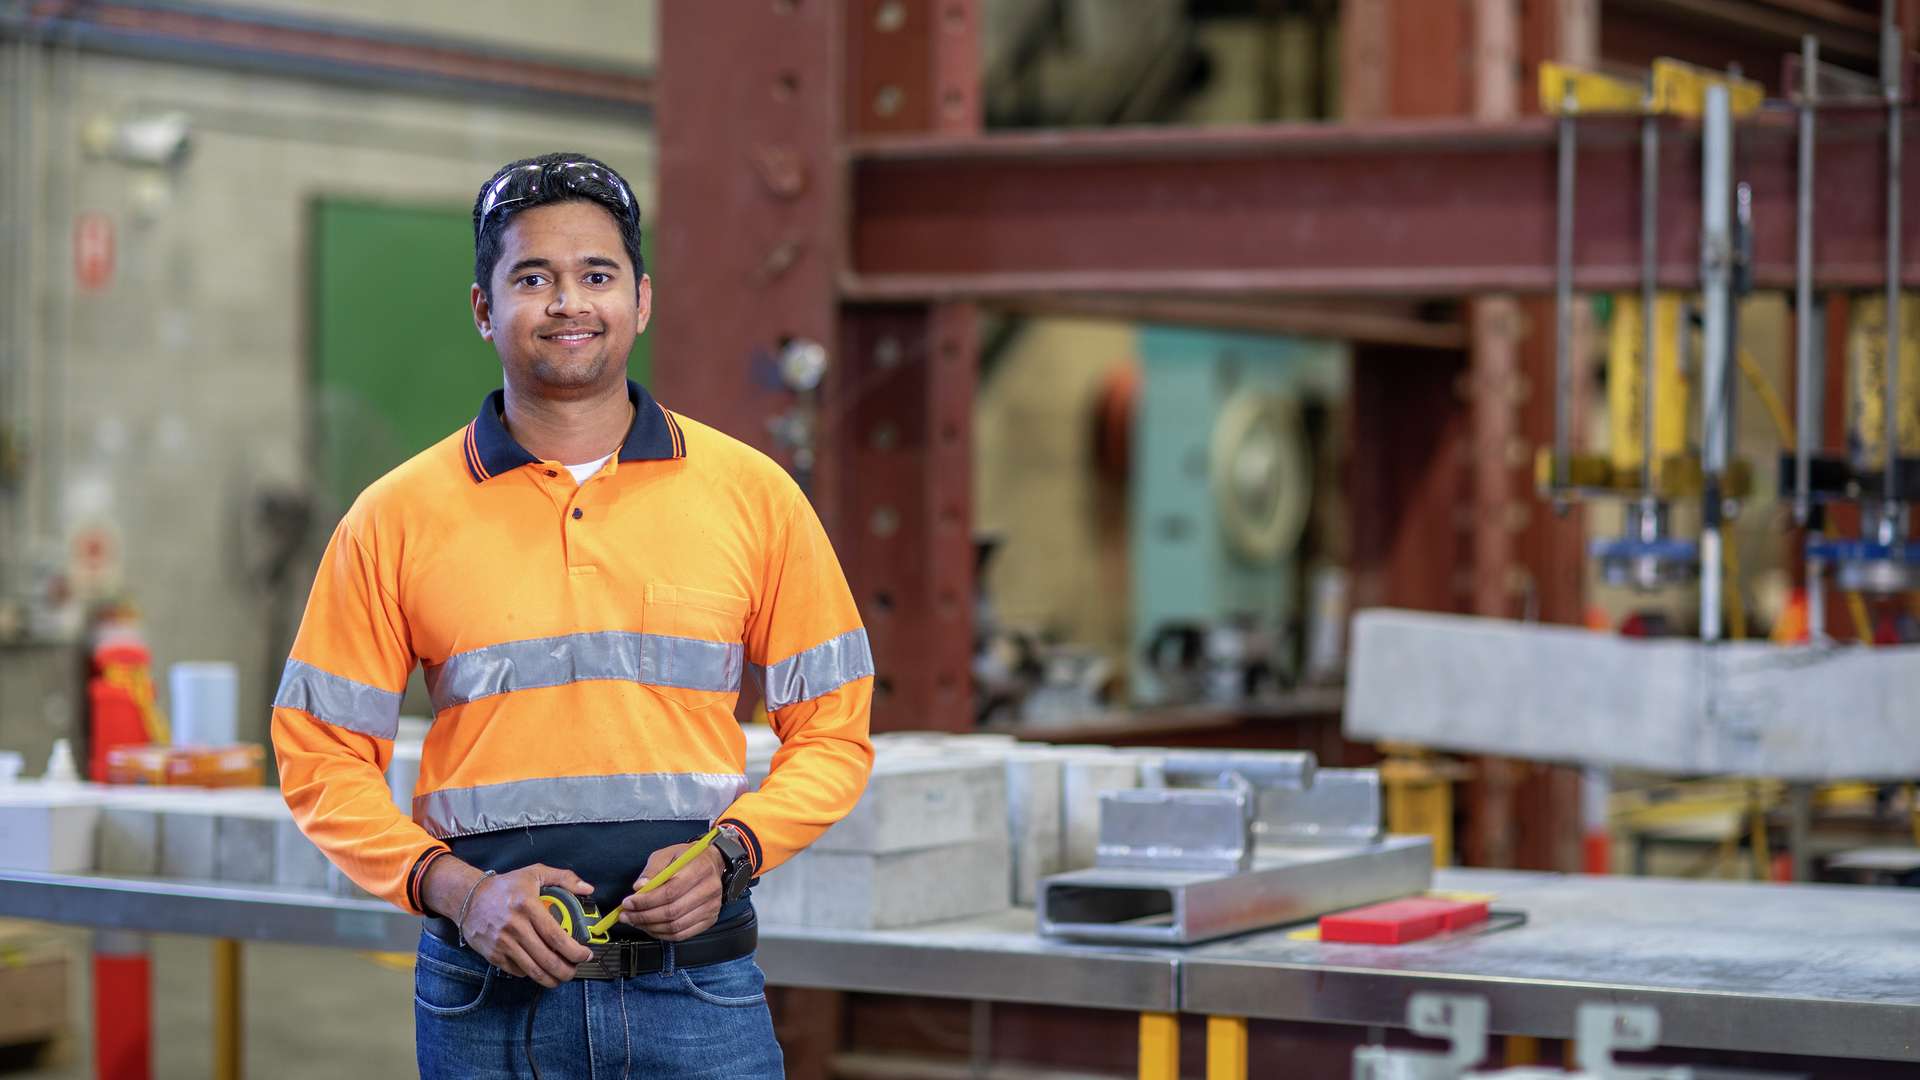 Civil Engineering student stands in engineering work shop with building materials on bench behind him.